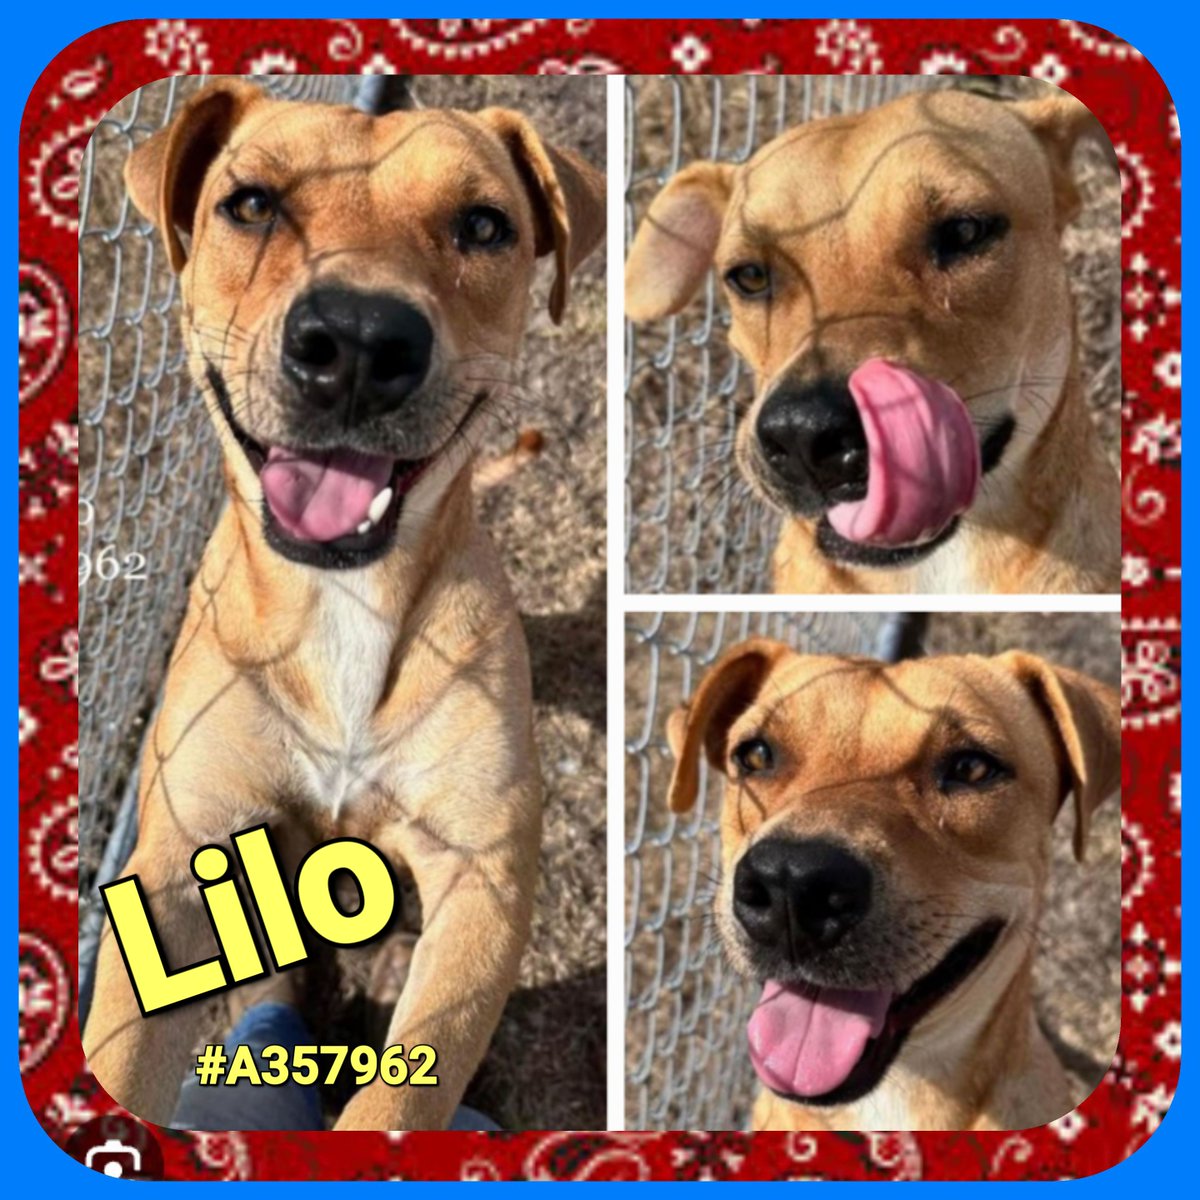 🐕⏰ LILO 🆘 #A357962 🚨⏰ 2yo 49lbs Male Black Mouth Cur Mix🥰 Fearful Around Kennel But Once Outside Runs & Plays🐶 Loves Treats & Affection🐕💞 Please PLEDGE for RESQ 🙏 ADOPTERS FOSTERS Contact👇 CORPUS CHRISTI ANIMAL 🐾 CARE 📧 ccacsrescues@cctexas.com 📞 361-826-4630